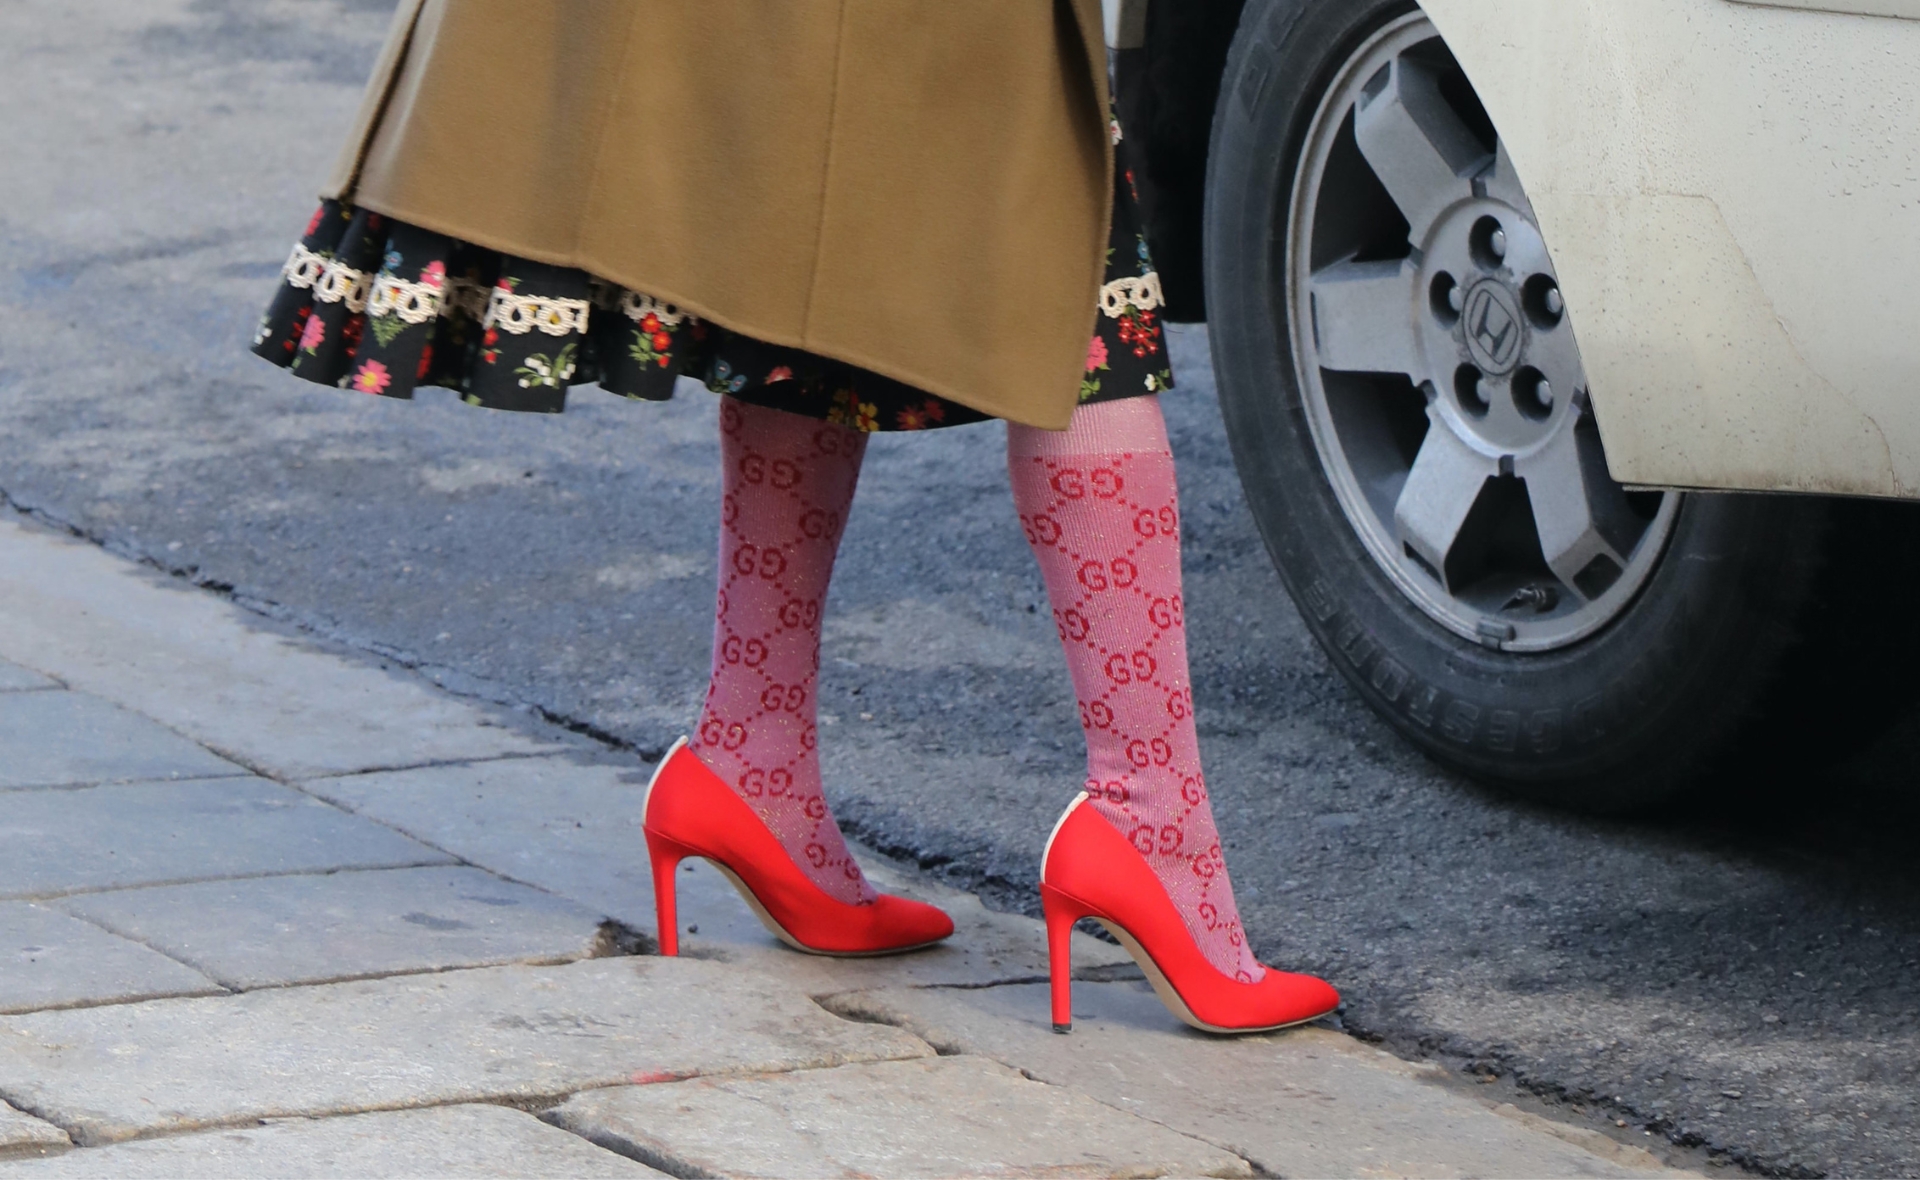 Strut in style (and snugness) with these sock subscriptions